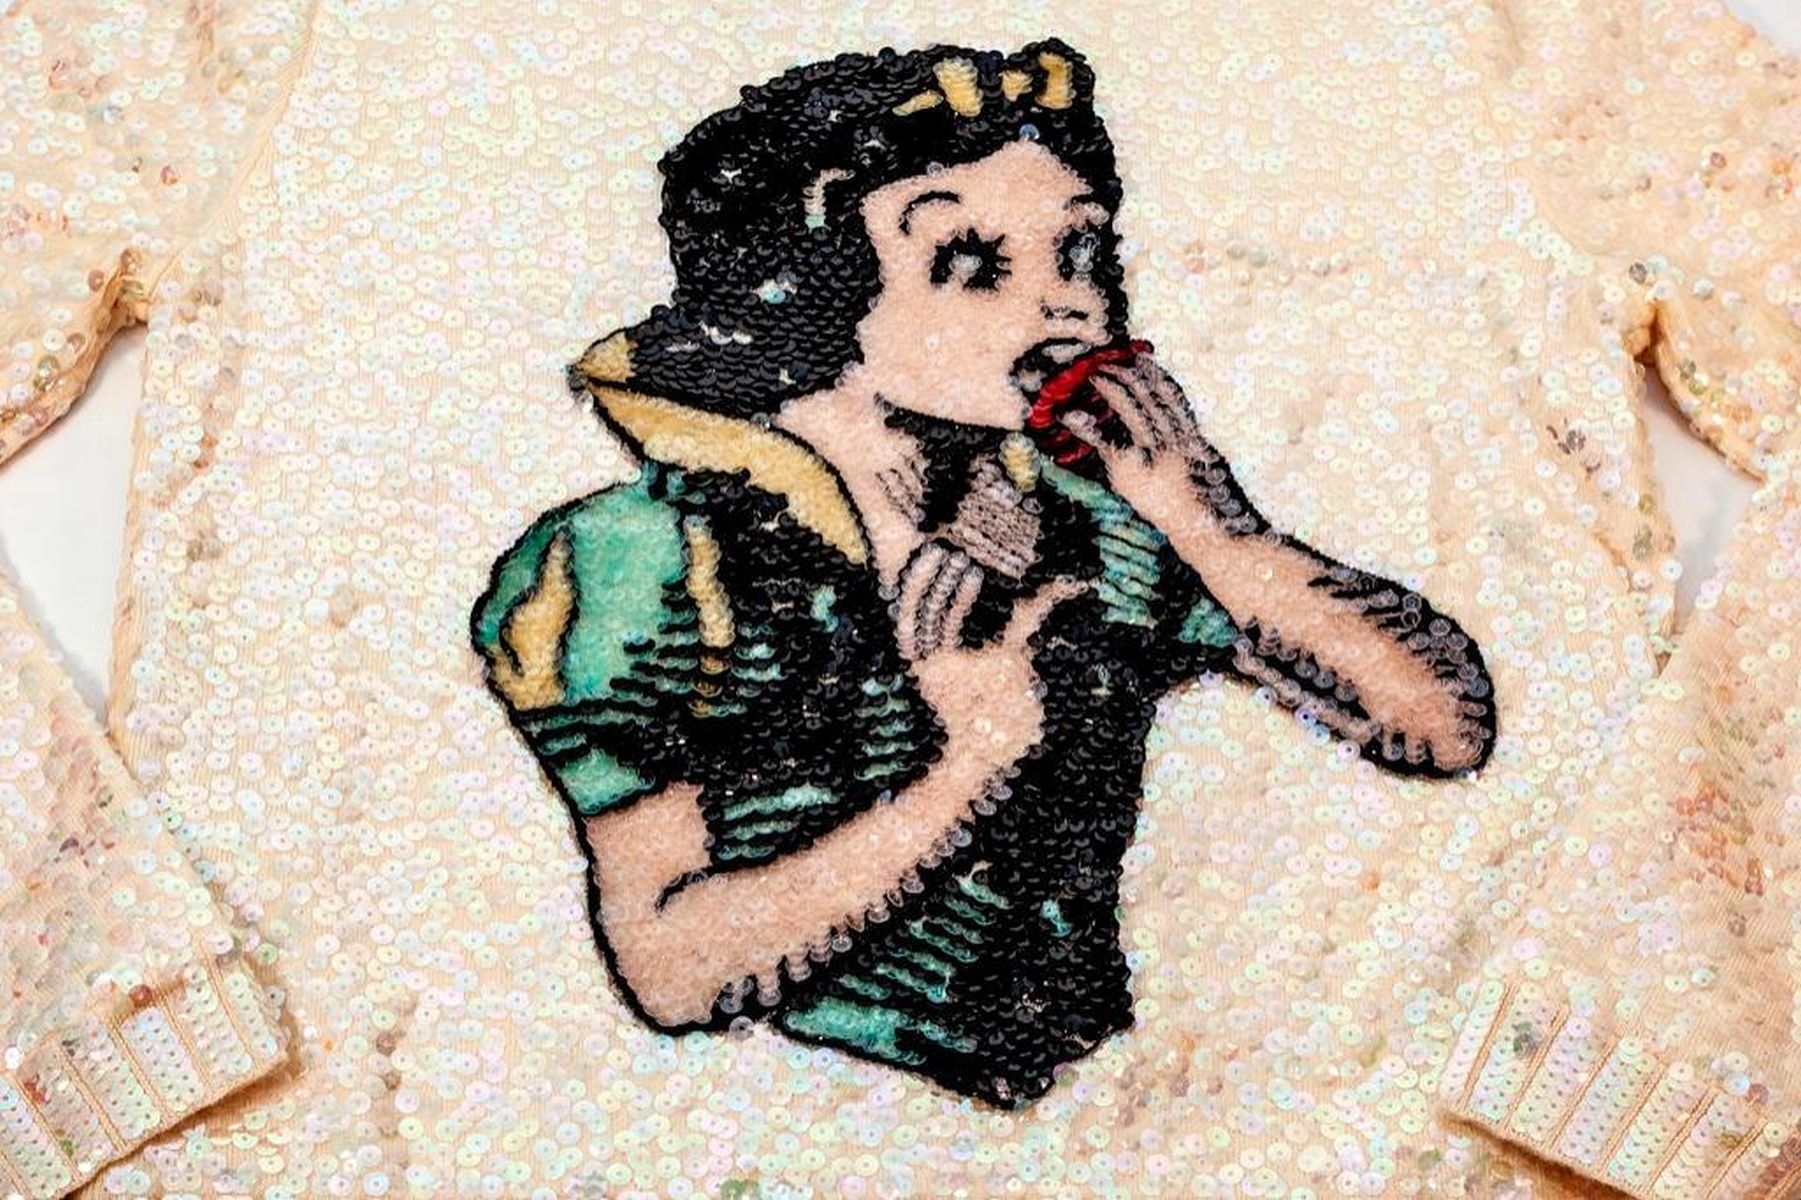 Gucci X Disney Sequin Embellished Snow White Sweater - Image 4 of 9